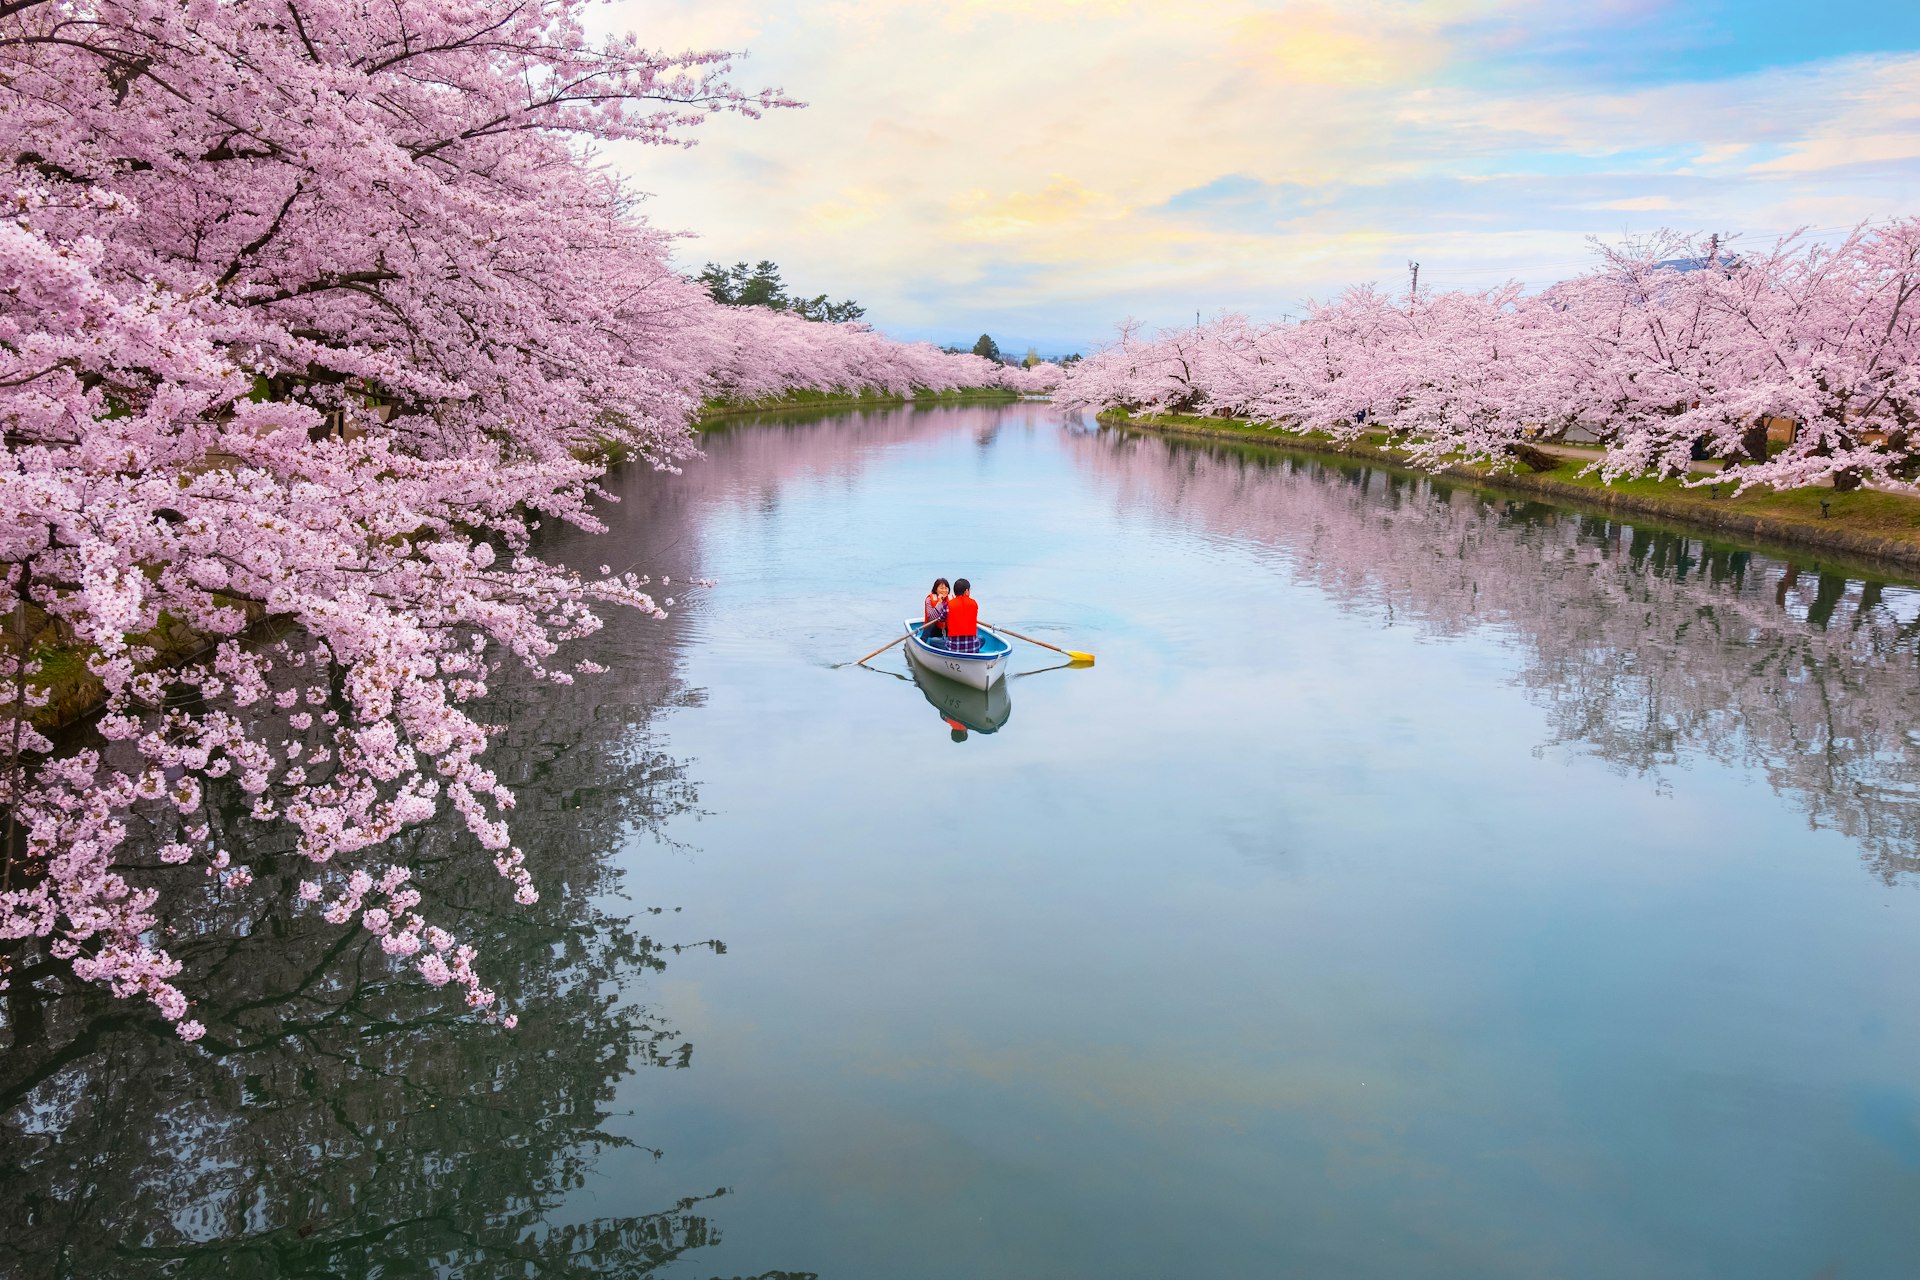 A couple rows in a row boat on the river surrounded by cherry blossoms